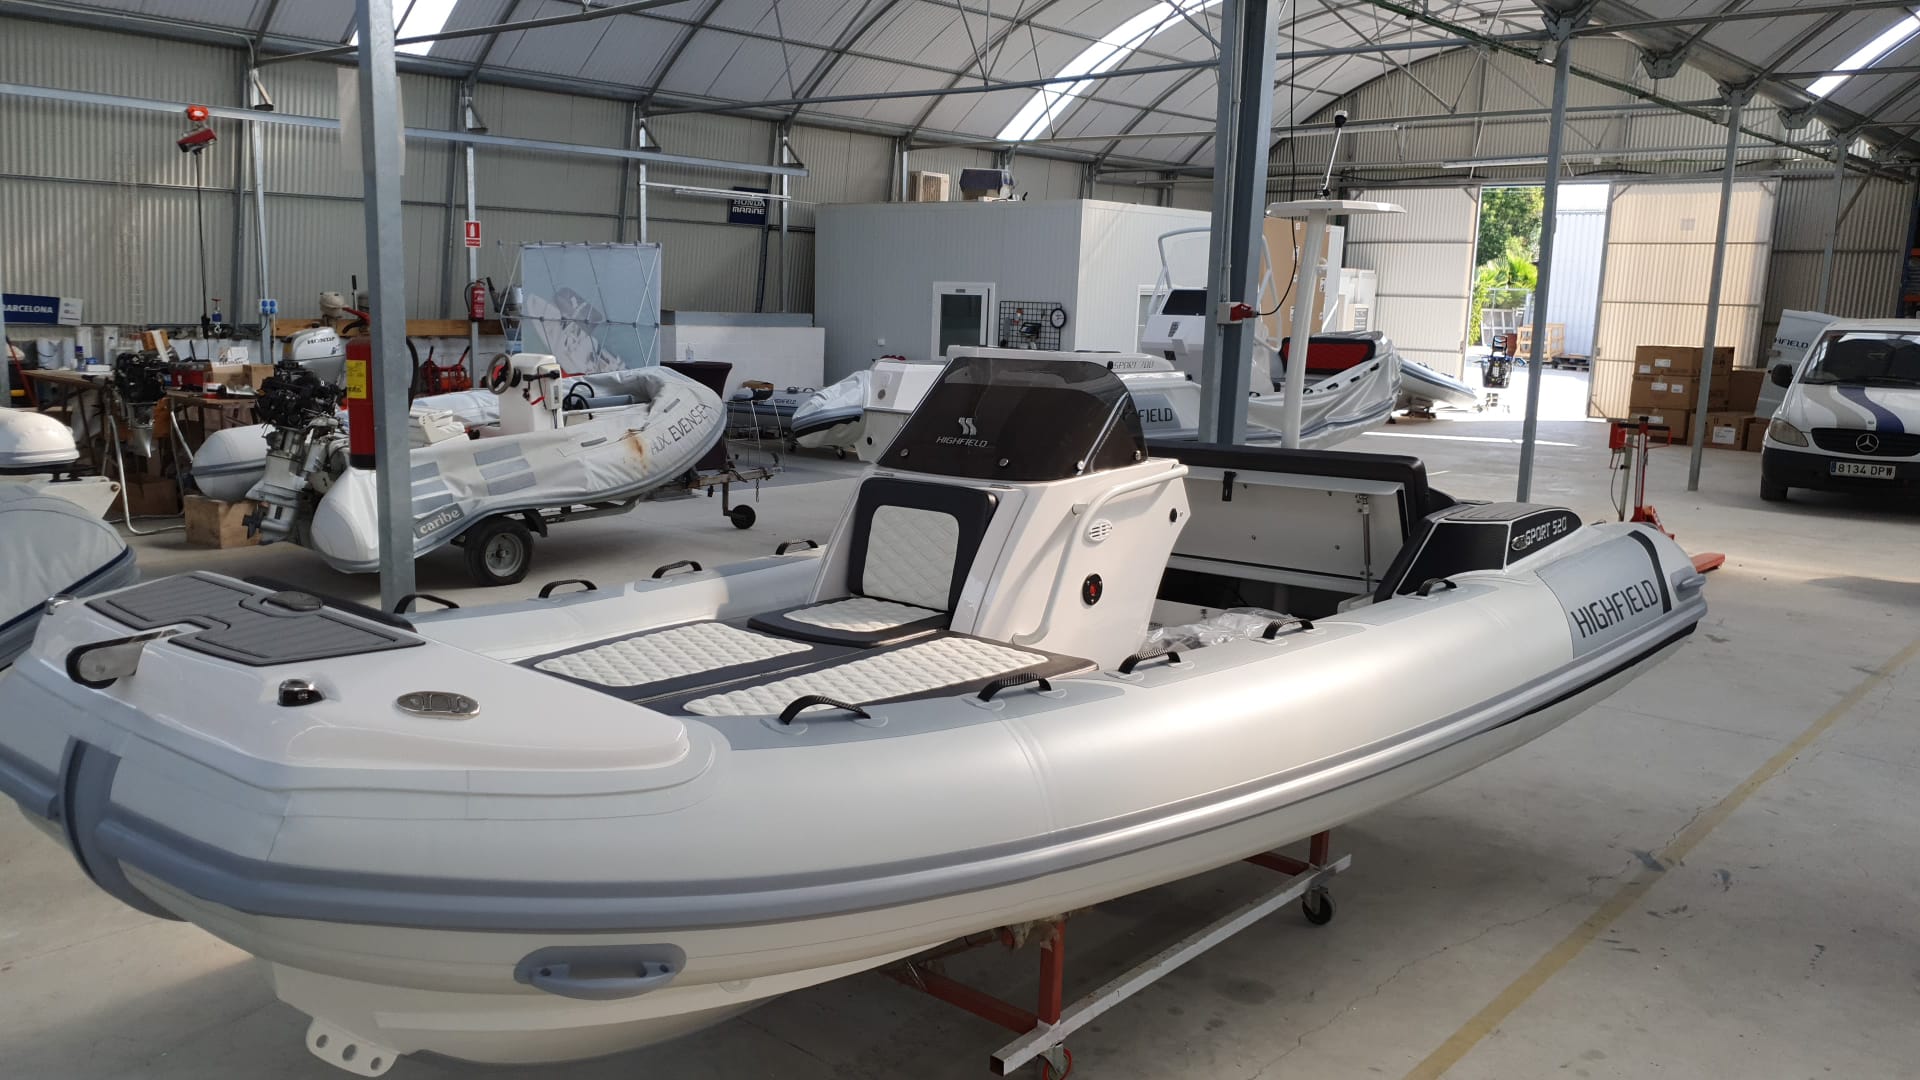 New 2022 Highfield Sport 520 for sale - Clearwater Marine